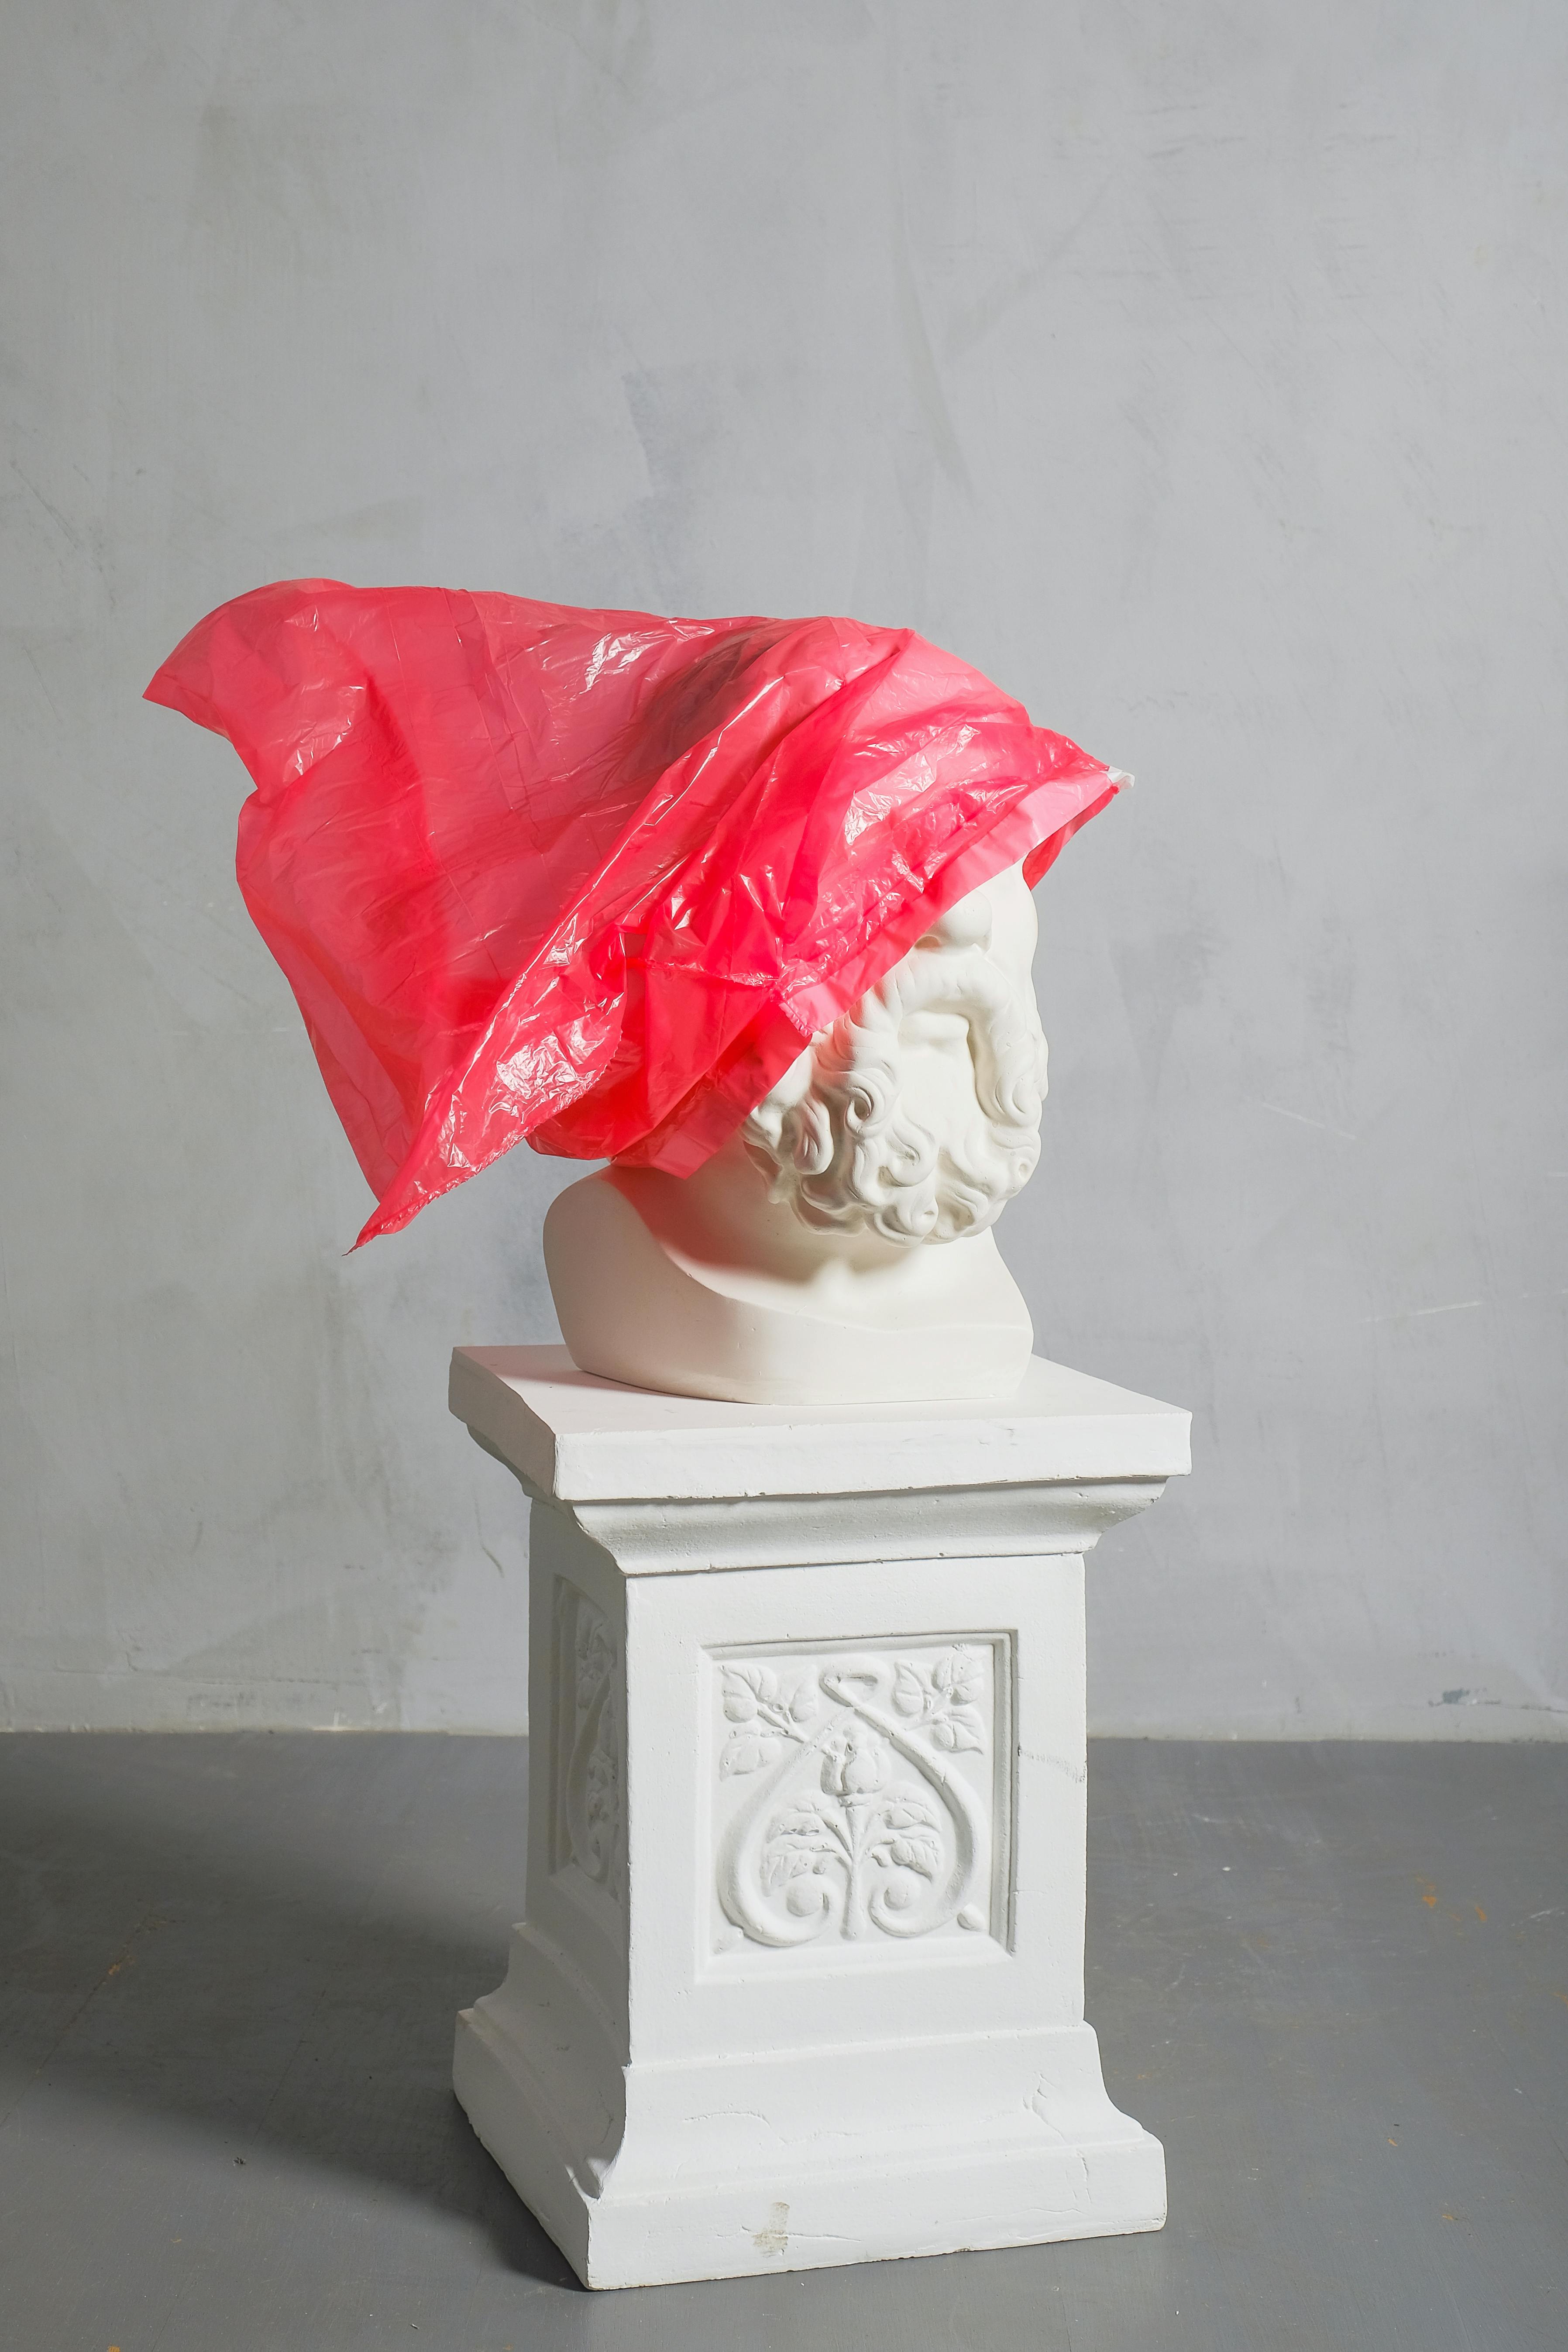 a photo of art sculpture covered with red plastic